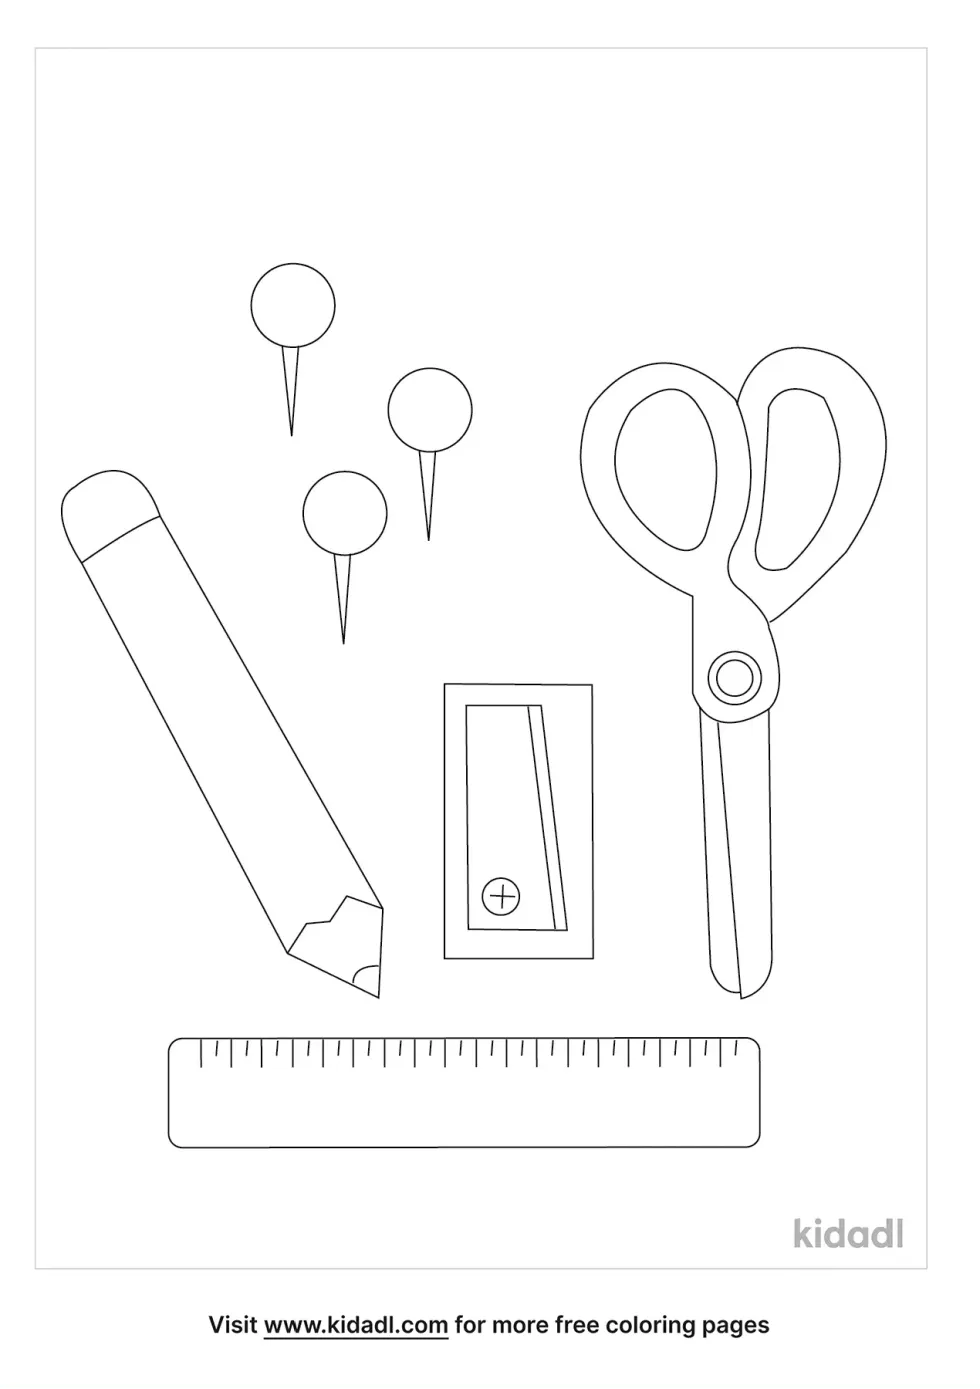 Stationery Coloring Page